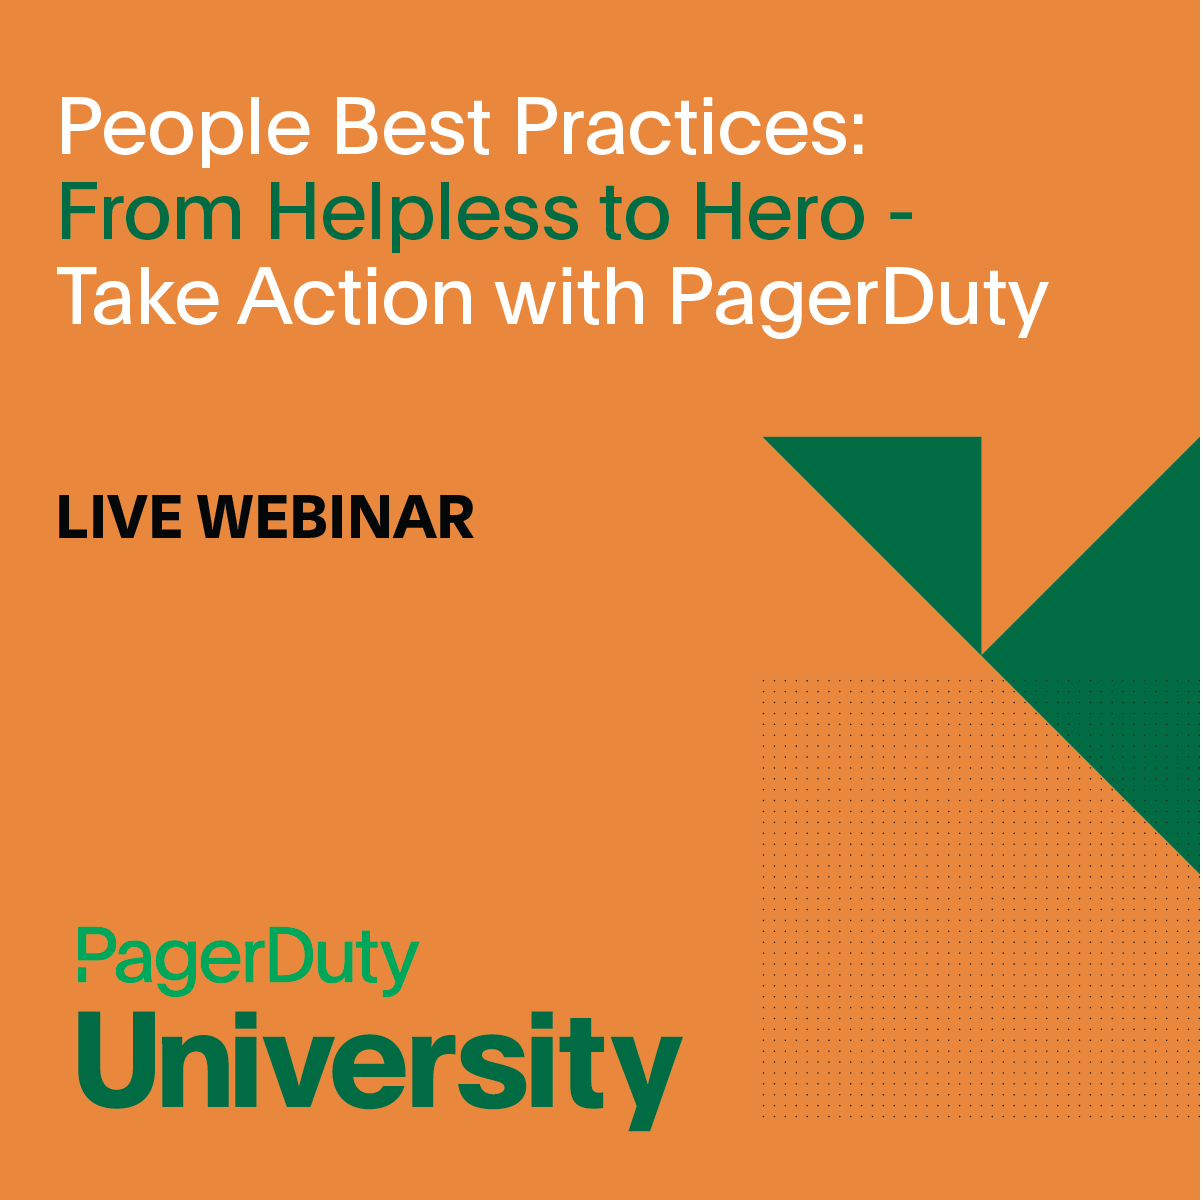 People Best Practices: From Helpless to Hero - Take Action with PagerDuty